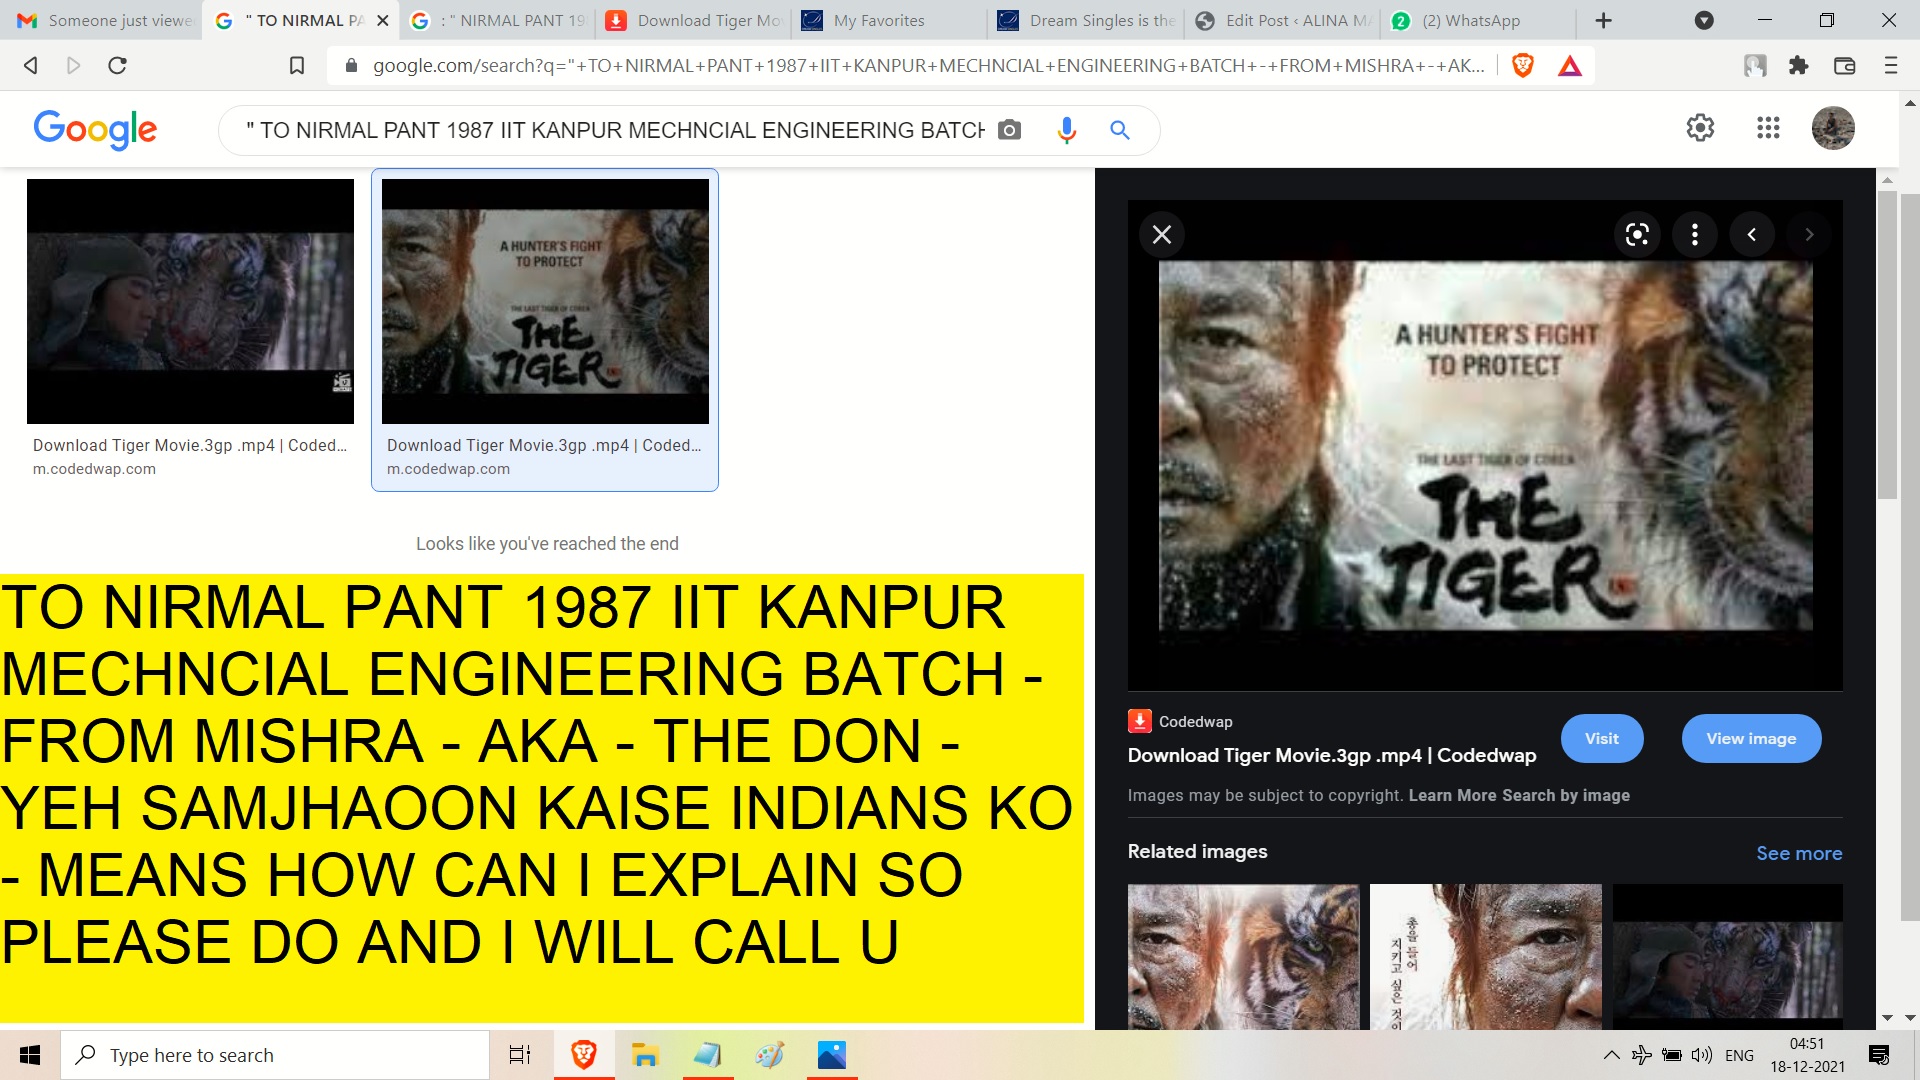 TO NIRMAL PANT 1987 IIT KANPUR MECHNCIAL ENGINEERING BATCH - FROM MISHRA - AKA - THE DON - YEH SAMJHAOON KAISE INDIANS KO - MEANS HOW CAN I EXPLAIN SO PLEASE DO AND I WILL CALL U